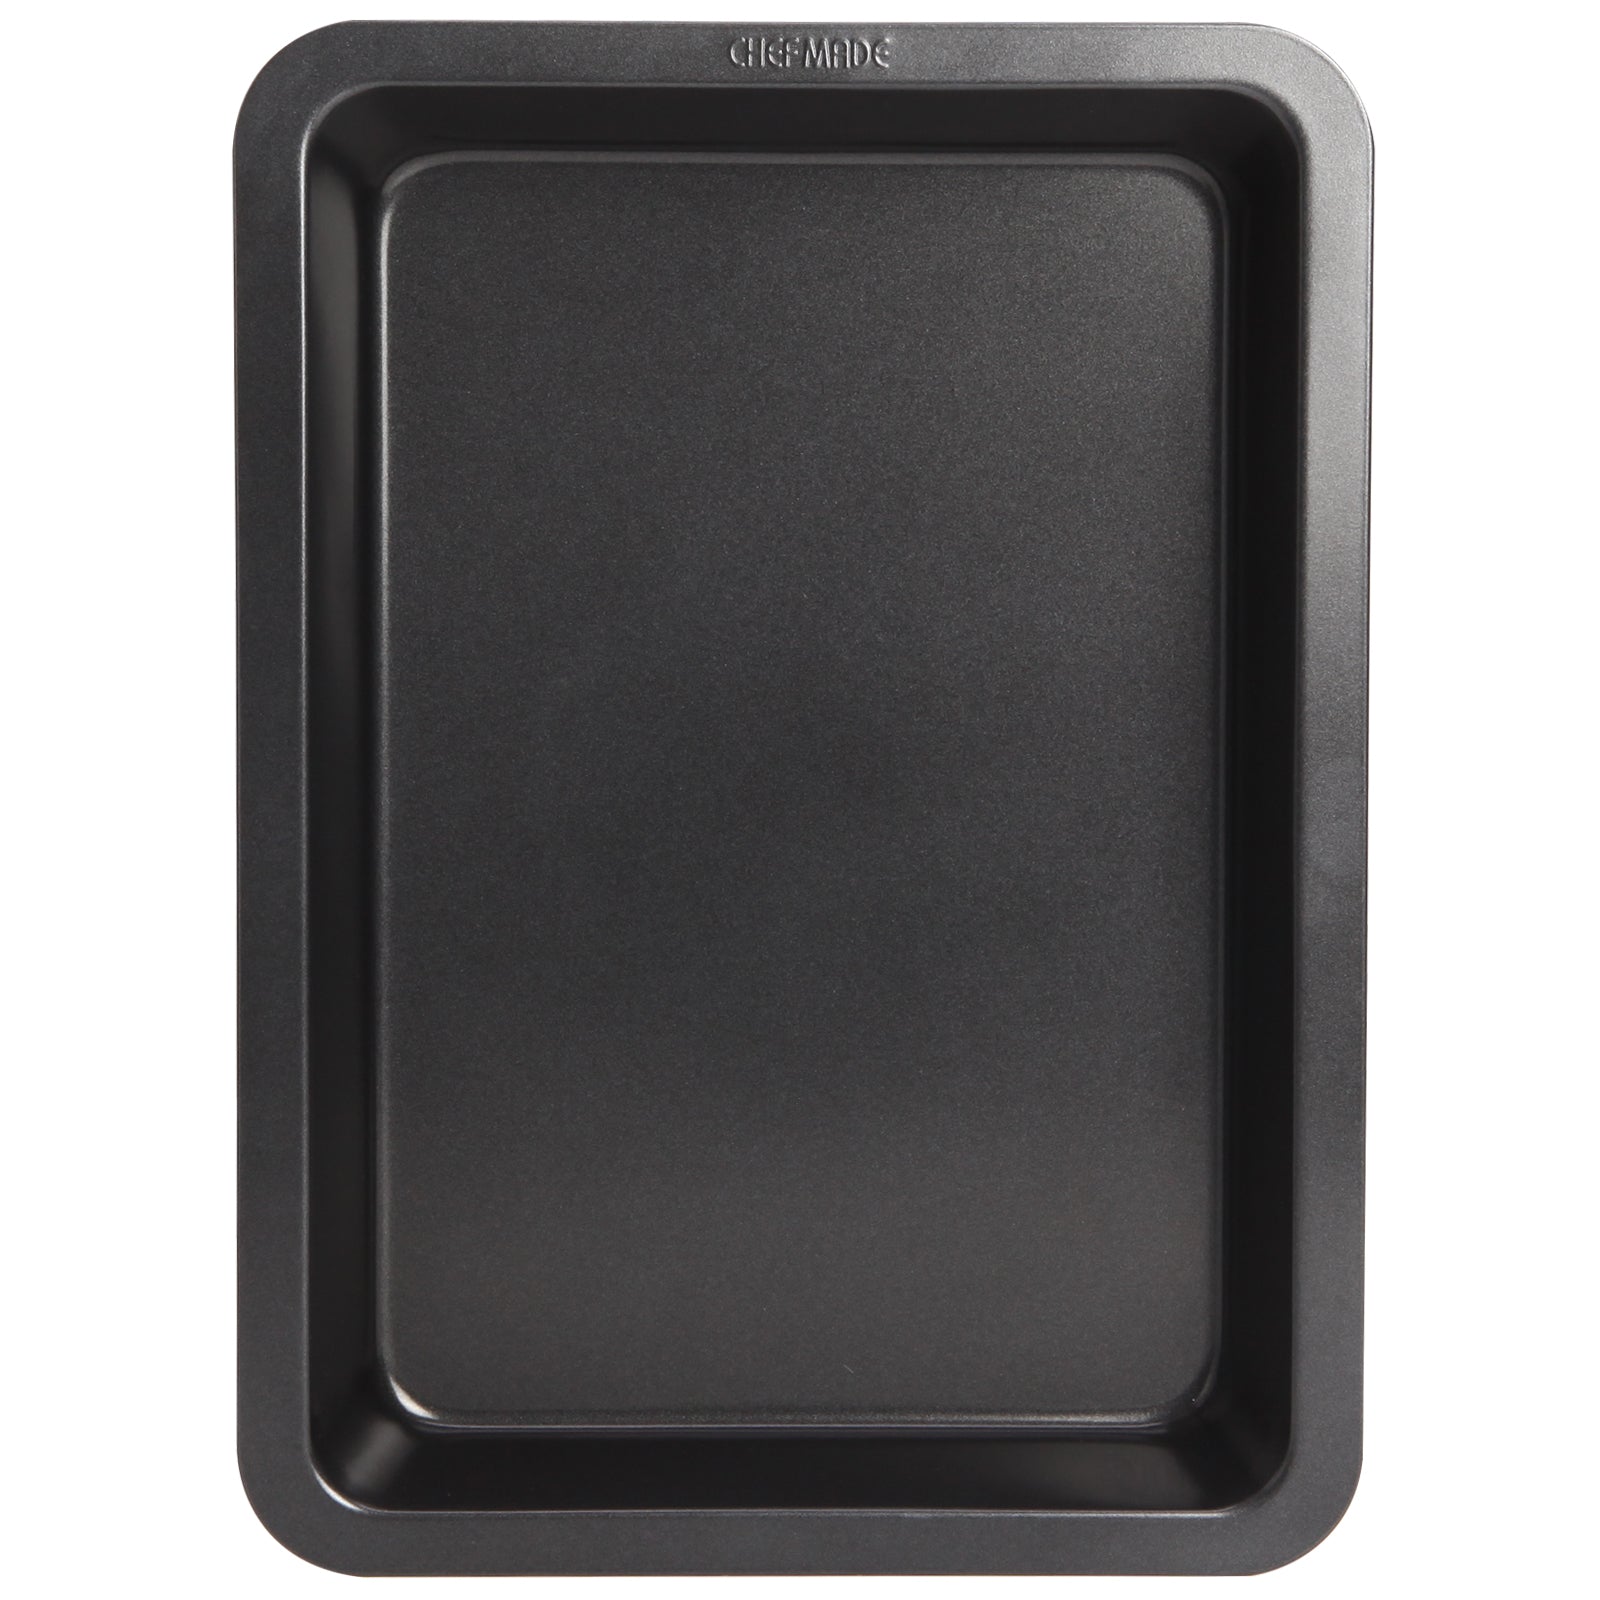 CHEFMADE 13 Inch Rectangle Cake Pan (Part number: WK9041)